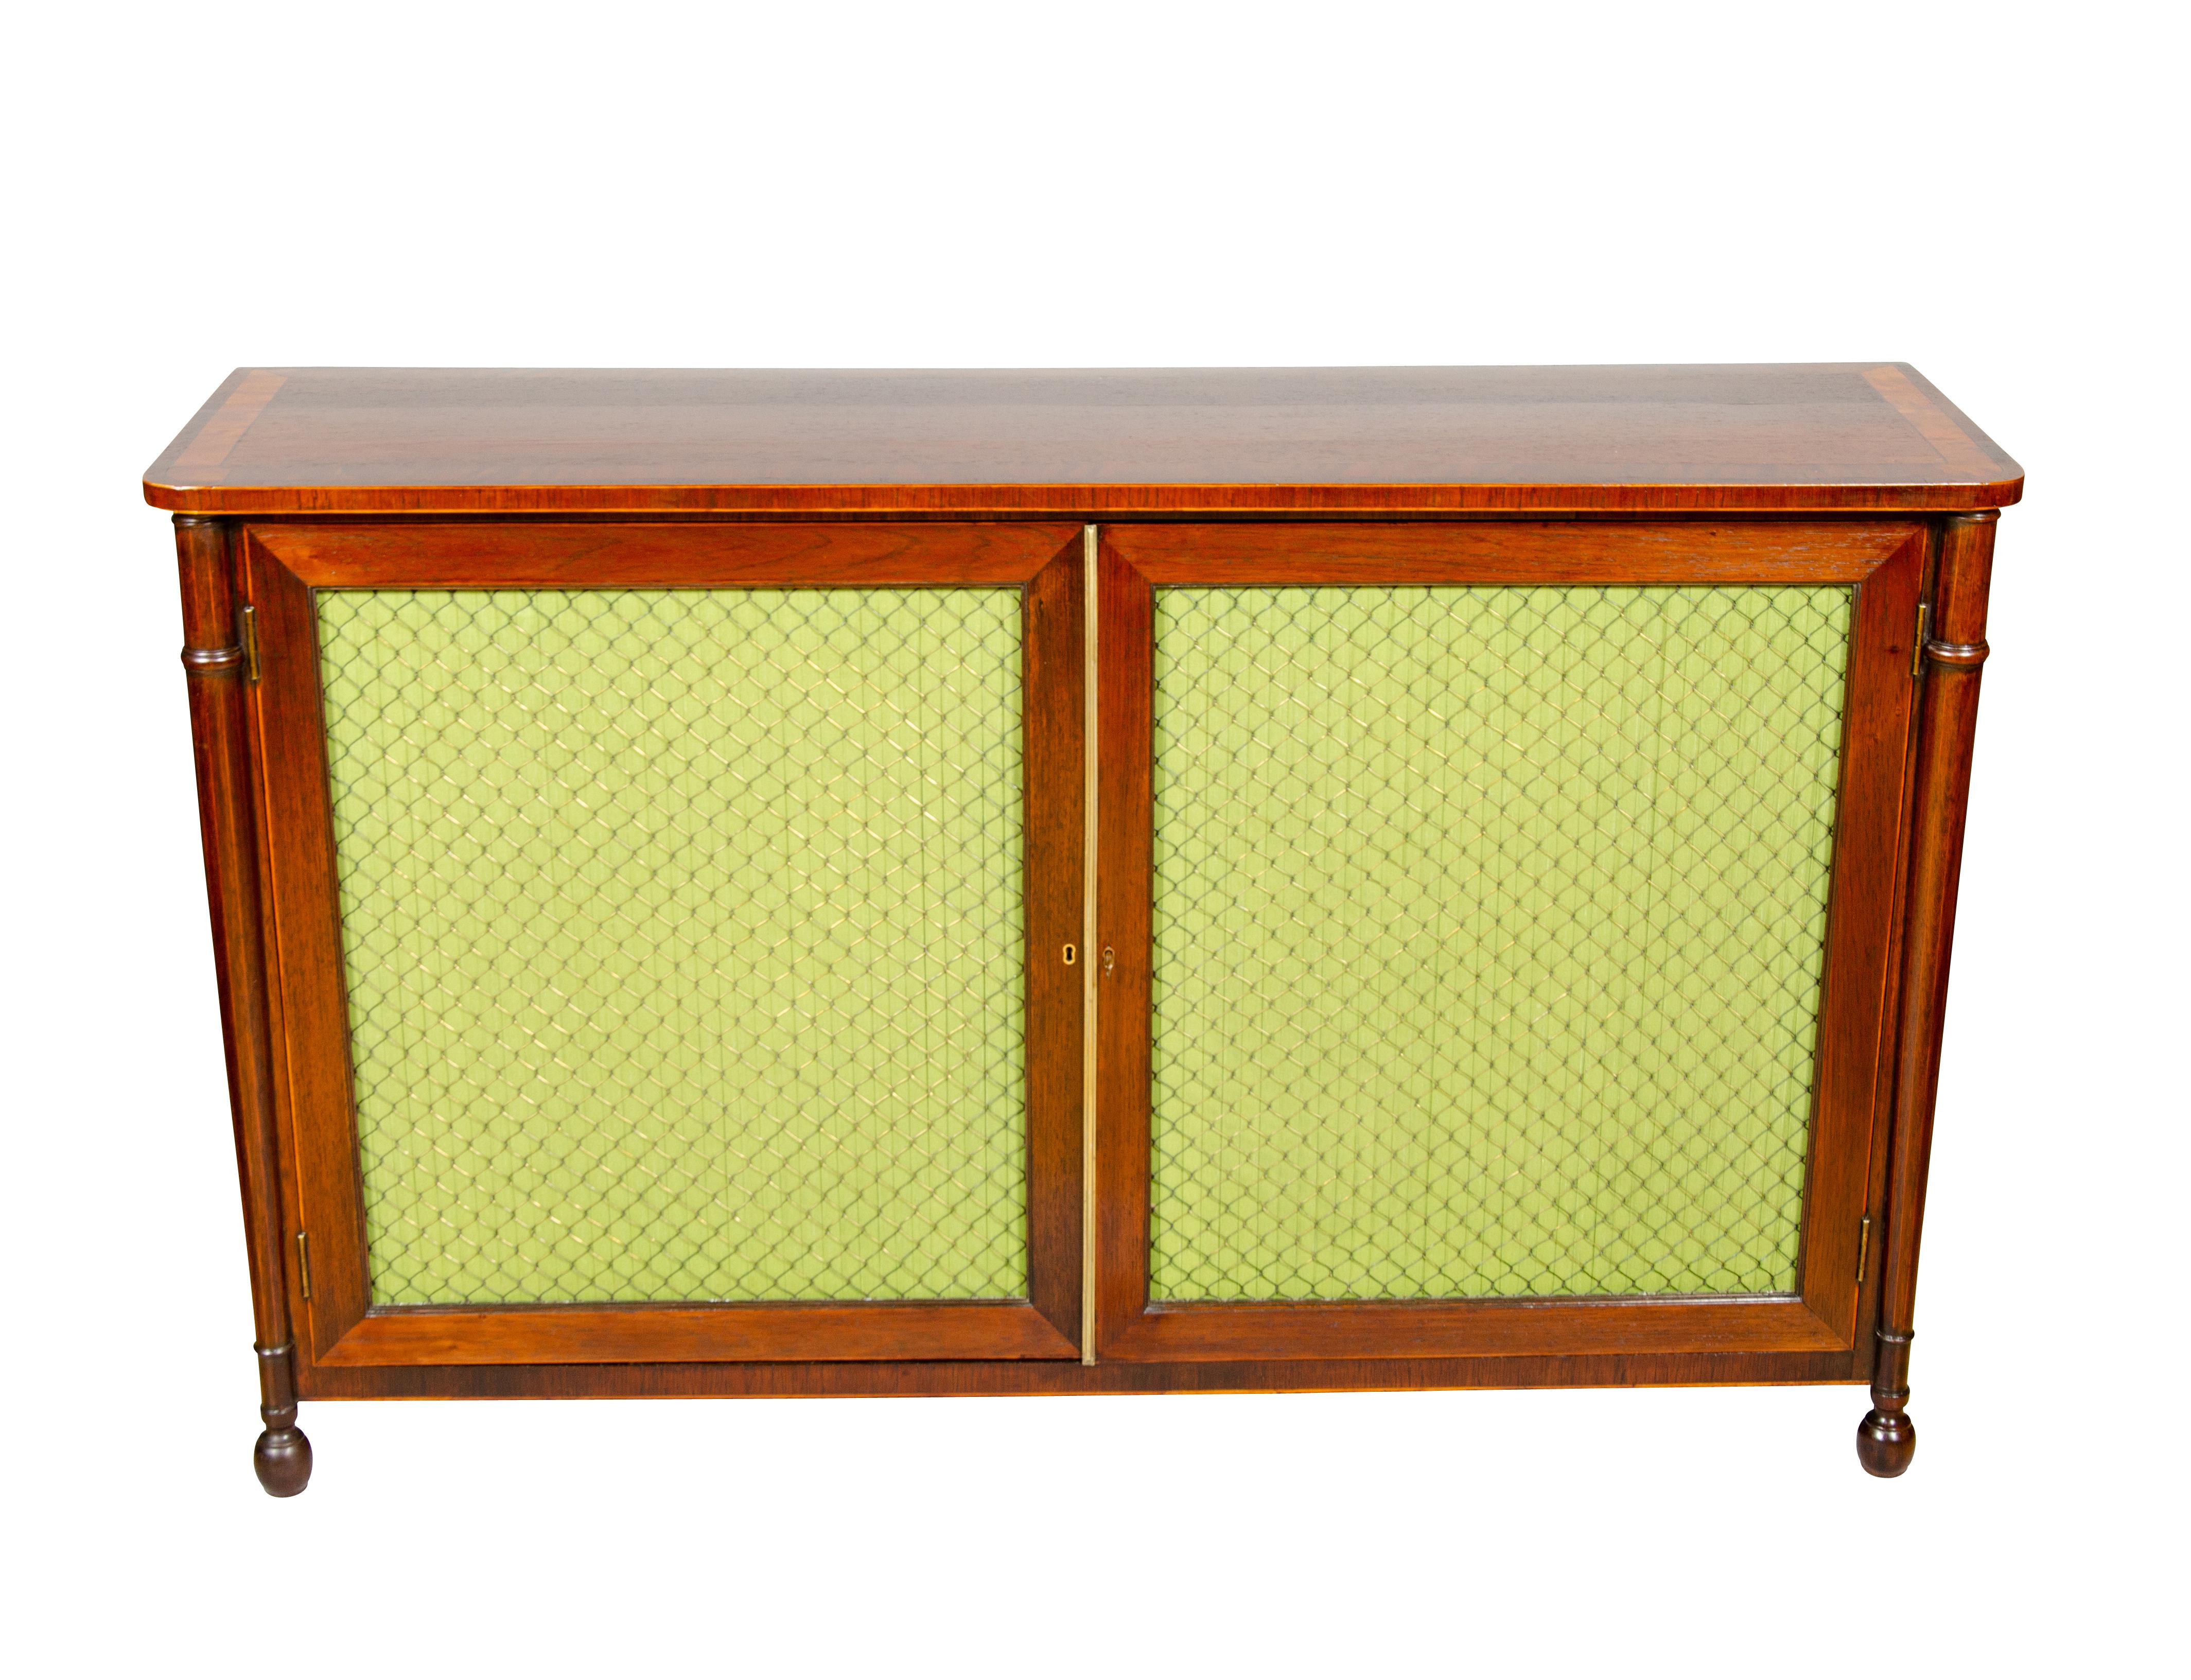 Rectangular top with banded edge over a pair of cabinet doors with wire grills enclosing two shelves, raised on turned legs. Ex Christies Ny Sale.